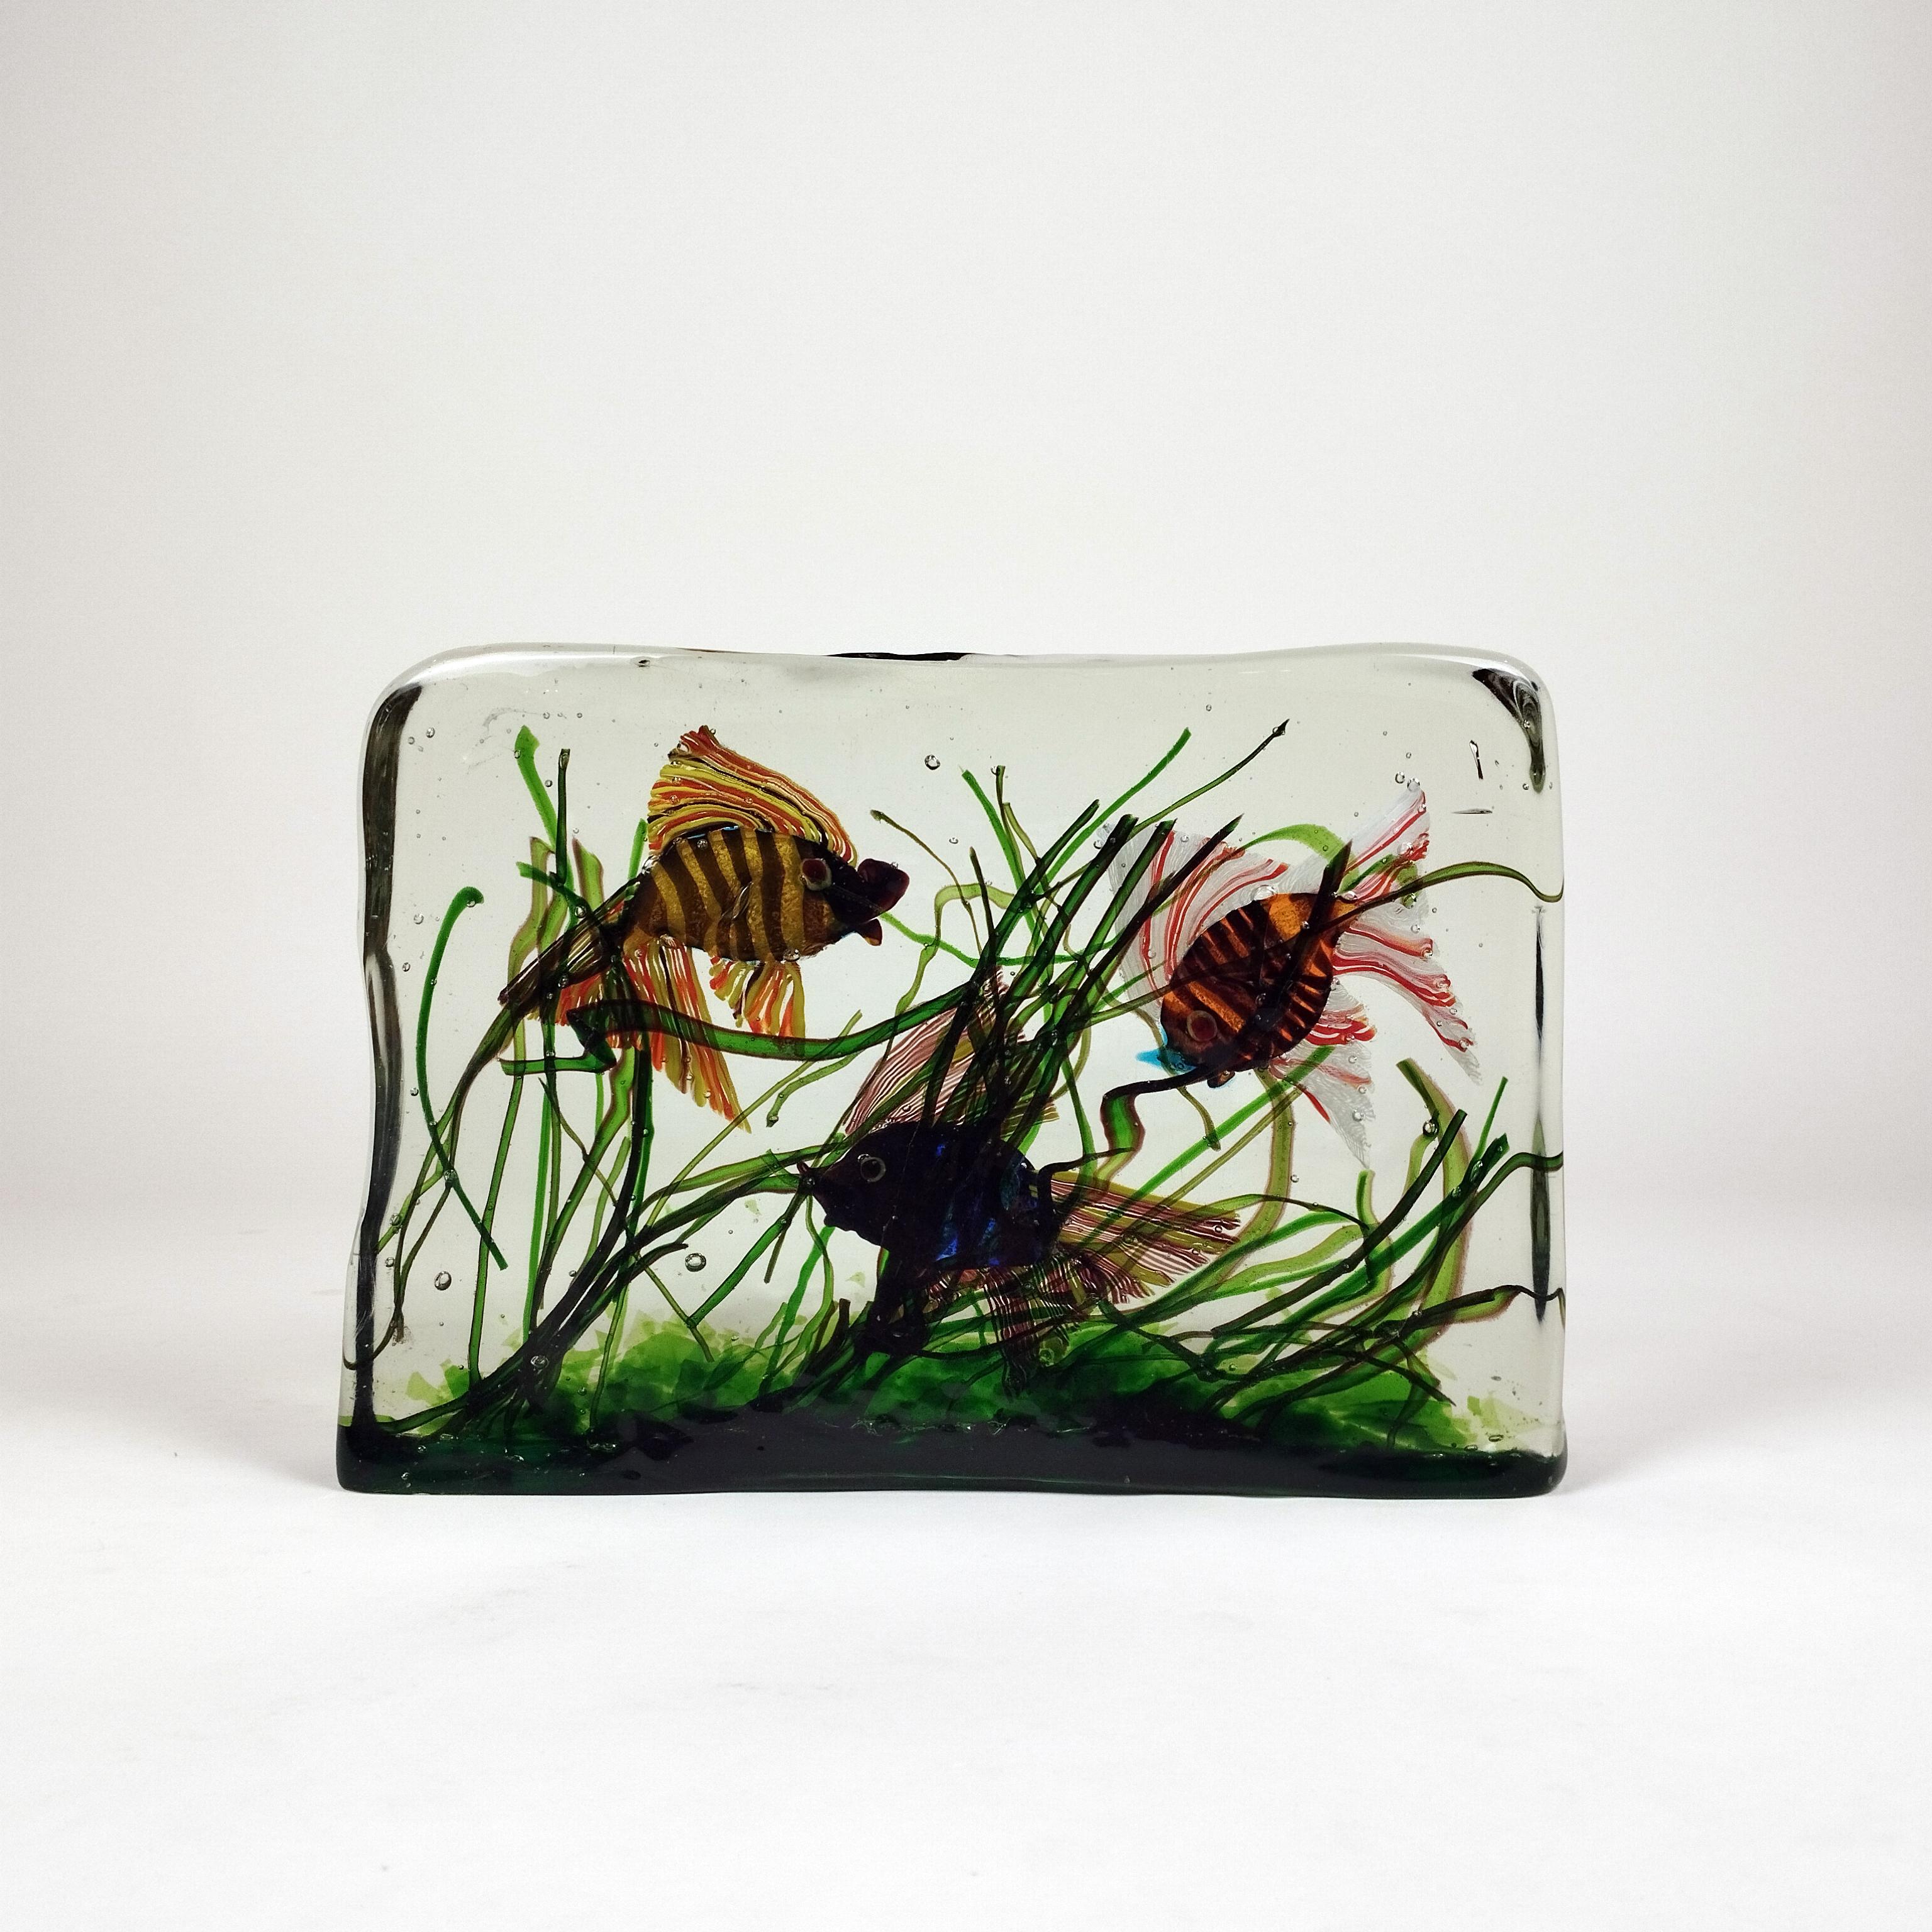 An Italian 1950's Murano glass aquarium sculpture by Archimede Seguso. The block of clear Murano glass shows three colorful goldfish swimming around seaweed.